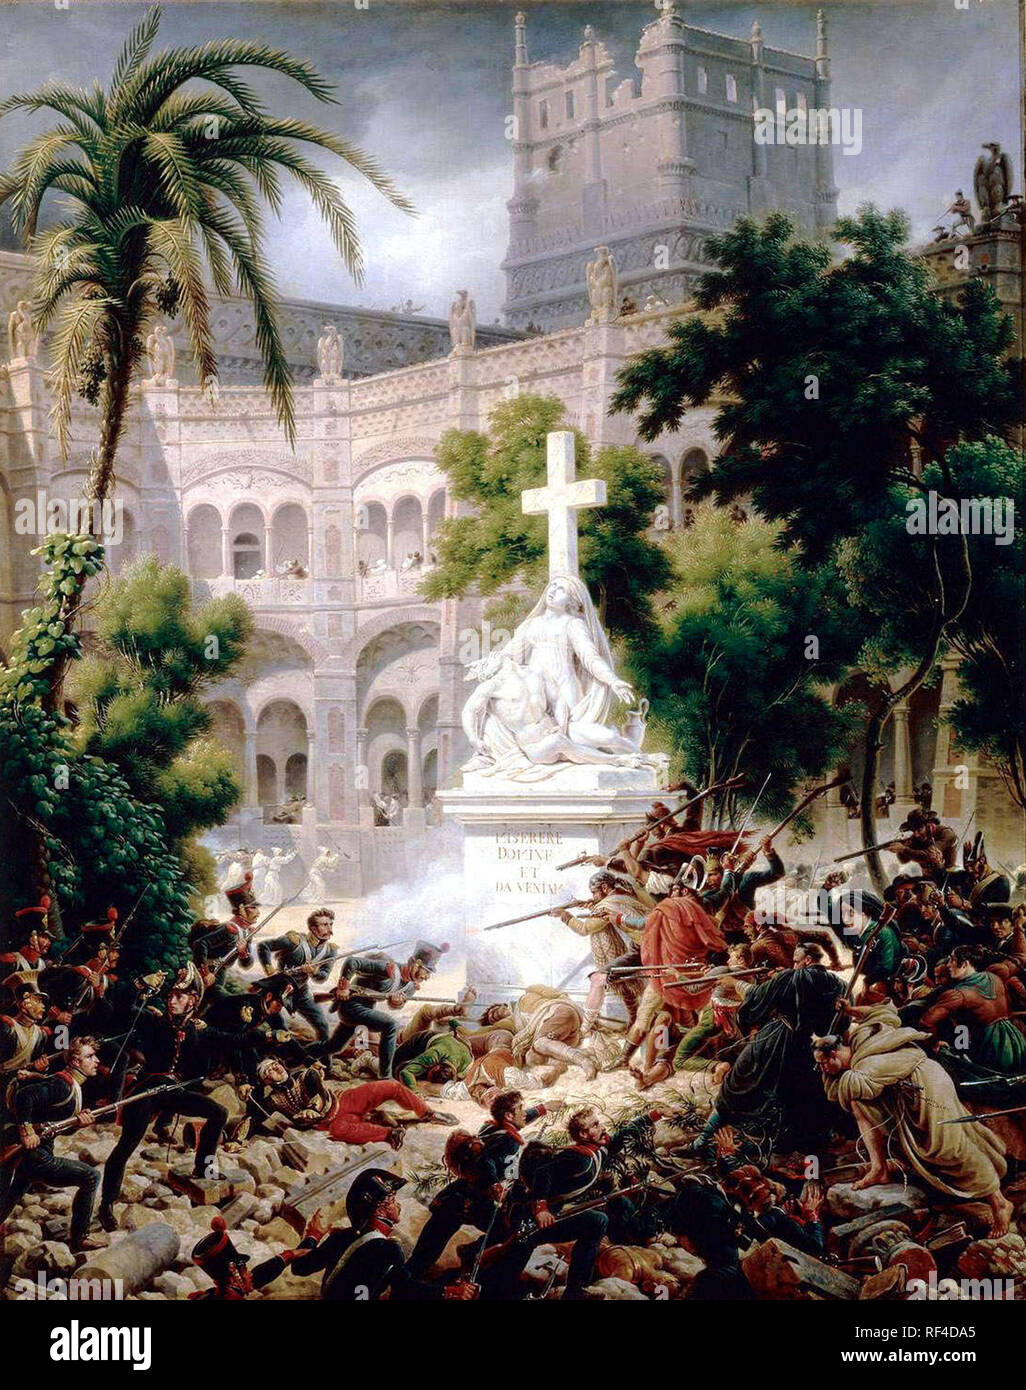 Siege of Saragossa (1809) by General Louis-François Lejeune, Second Siege of Zaragoza was the French capture of the Spanish city of Zaragoza (also known as Saragossa) during the Peninsular War. Depicts the fighting of February 8, 1809. Stock Photo